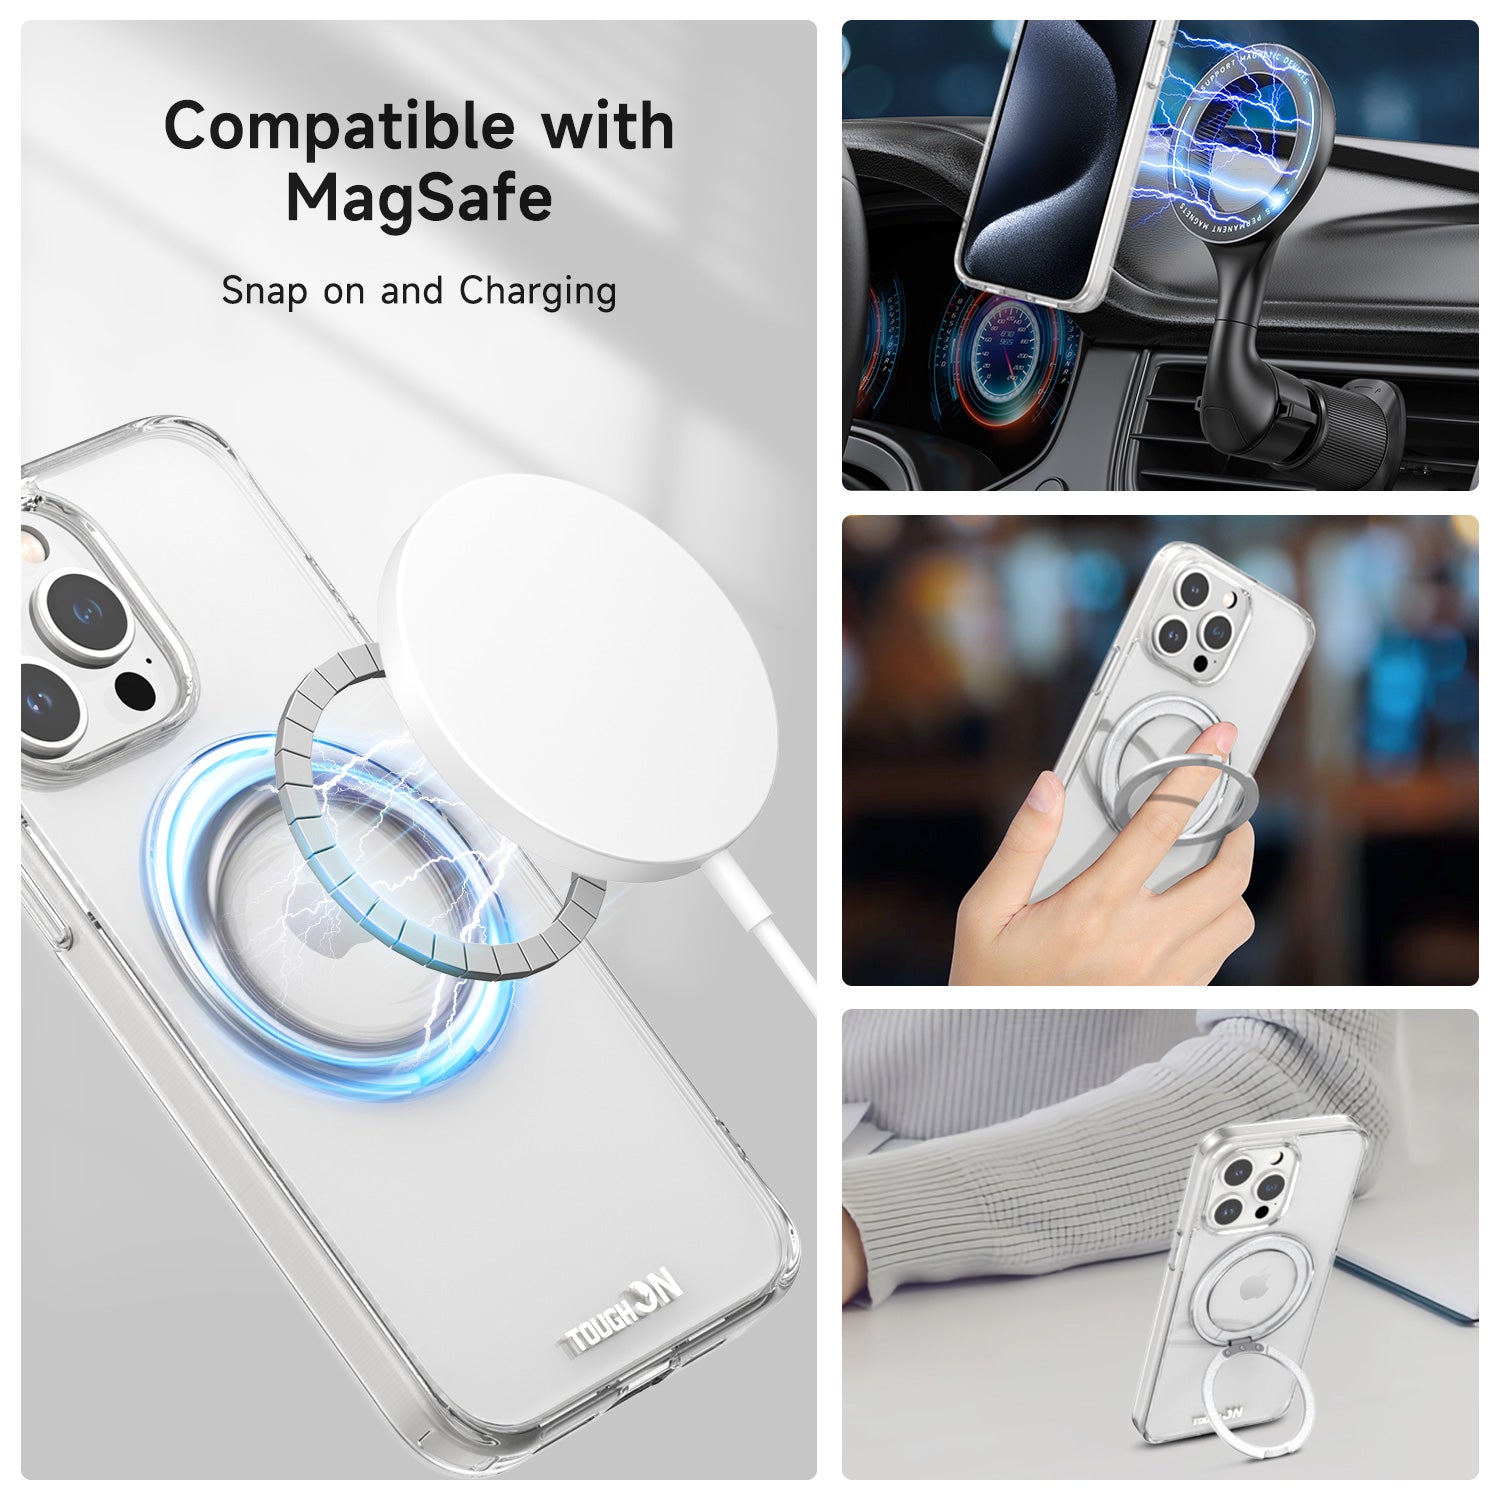 Tough On iPhone 15 Pro Case 360° Rotate Stand With MagSafe